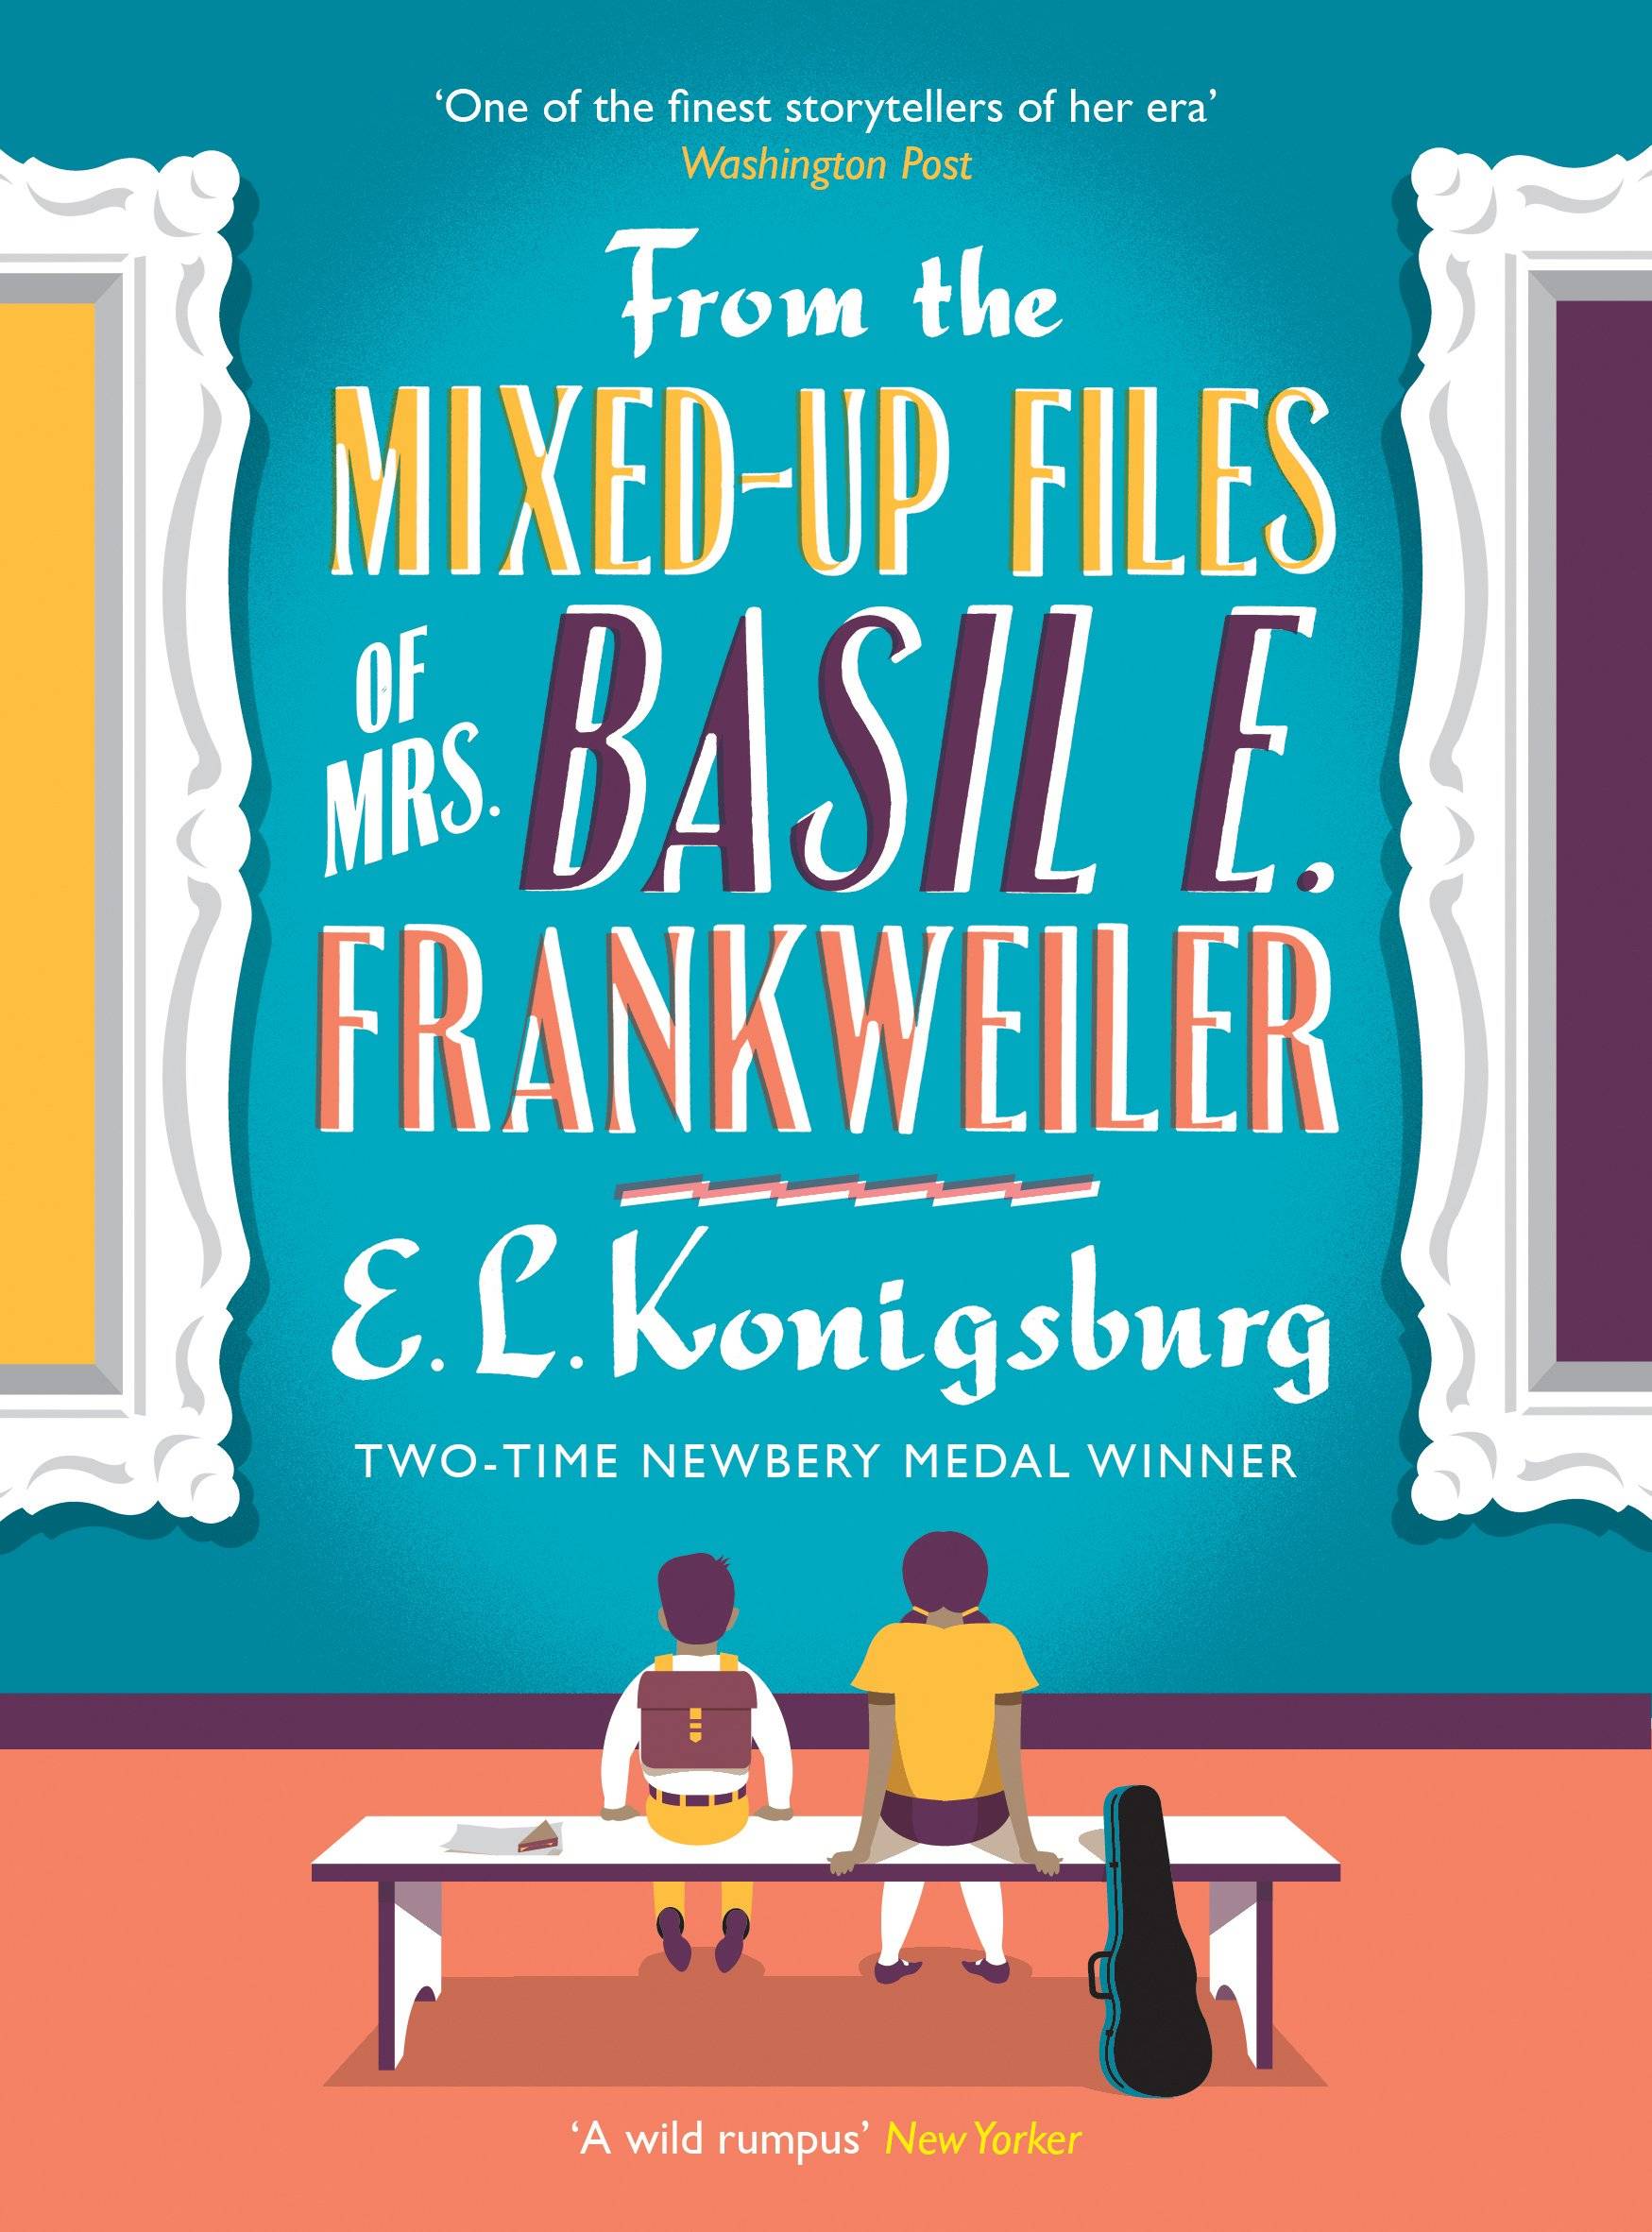 IMG : From the mixed up files of mrs. Basil E. Frankweiler